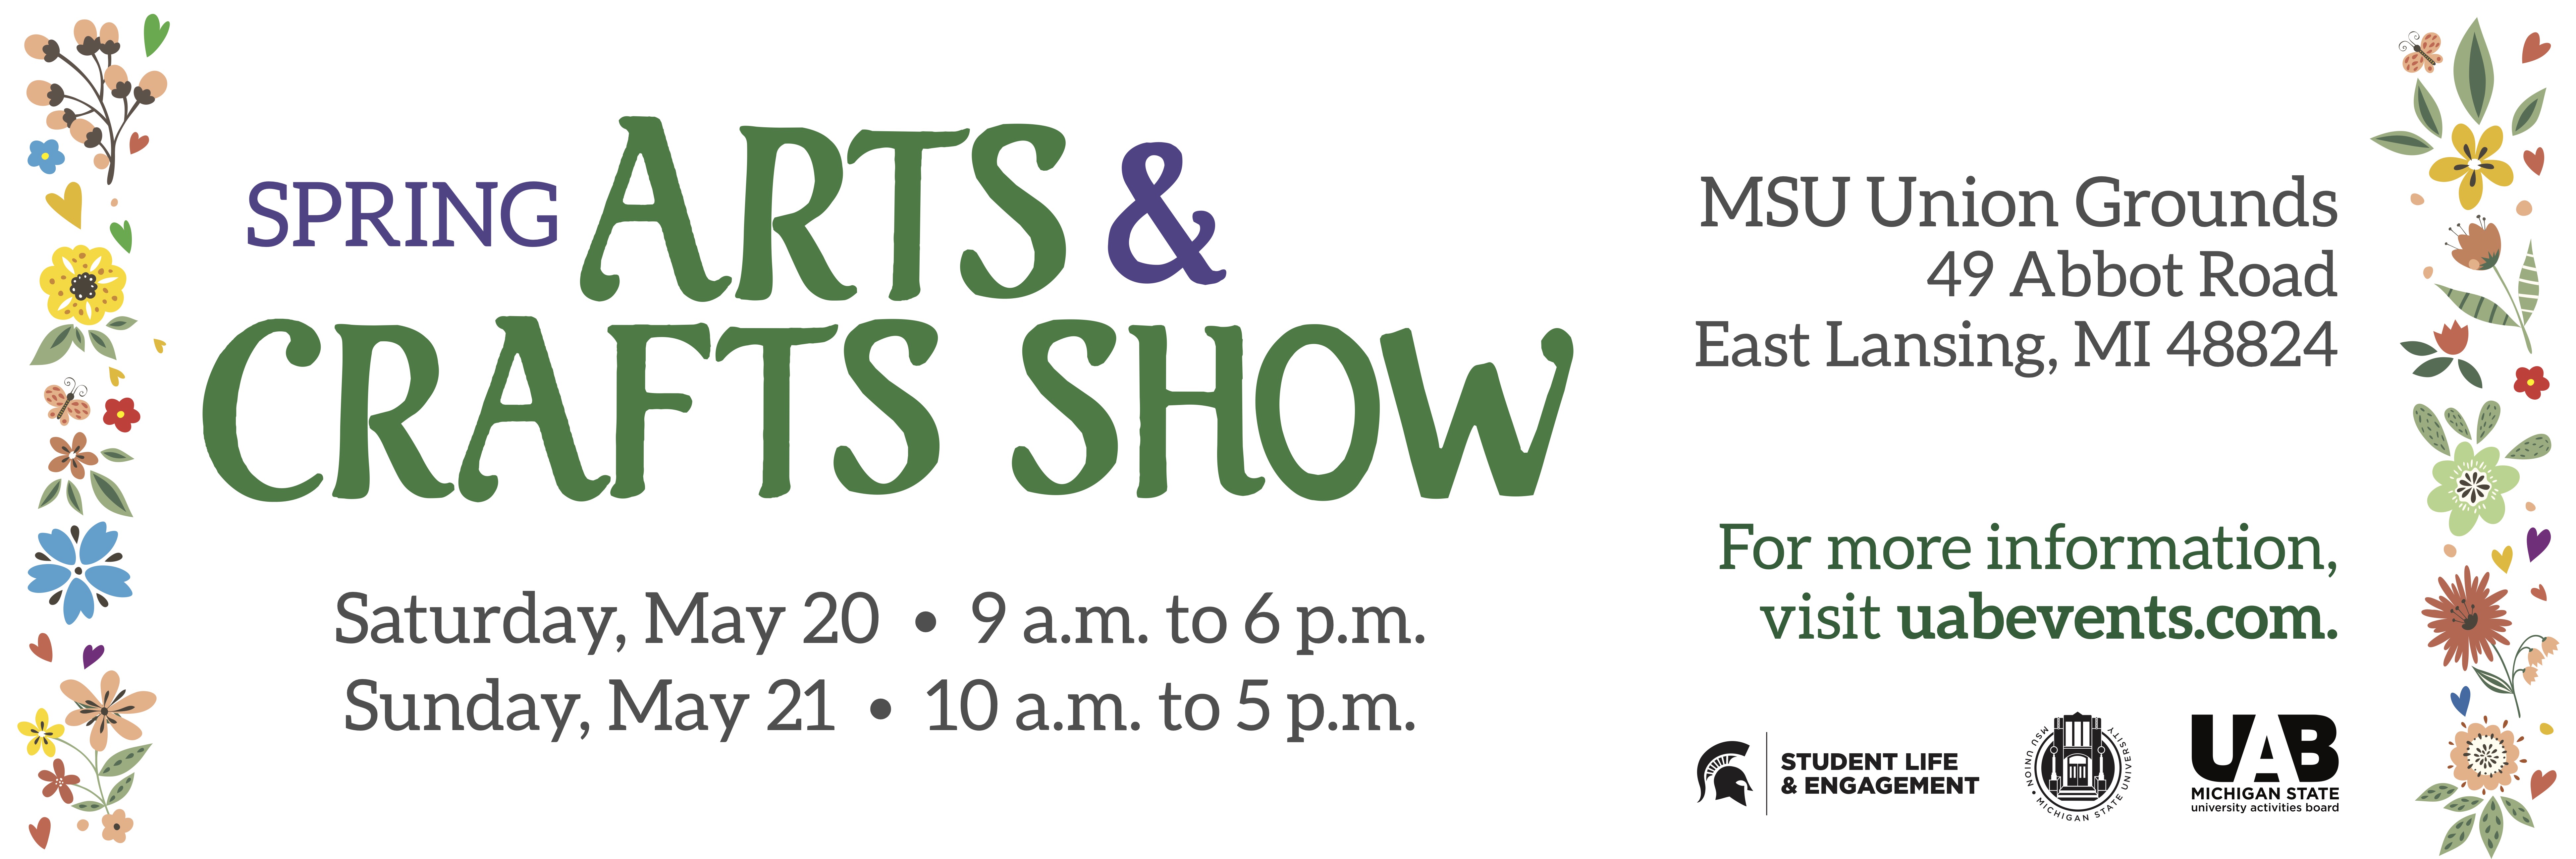 Spring Arts & Crafts Show banner with flowers.  UAB, MSU Union, and Student Life and Engagement logos.